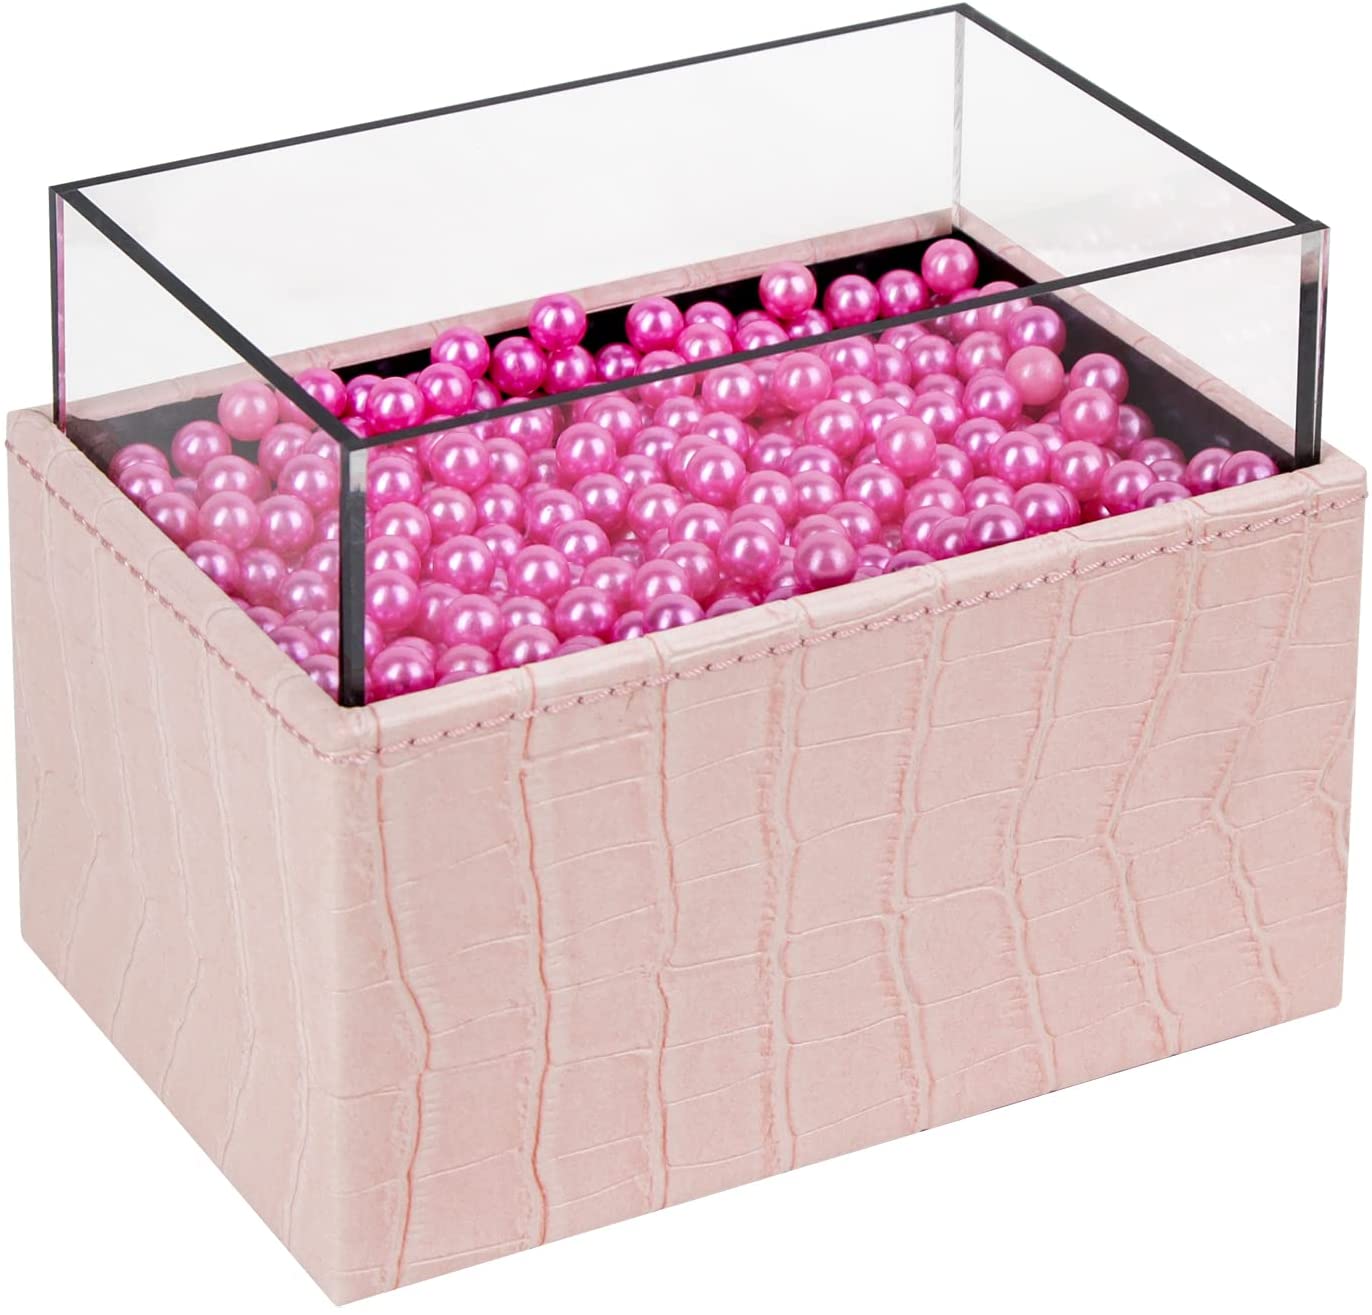 Leather Makeup Brush Cosmetic Organiser Storage Box with Pink Pearls and Acrylic Cover (Pink) - SILBERSHELL